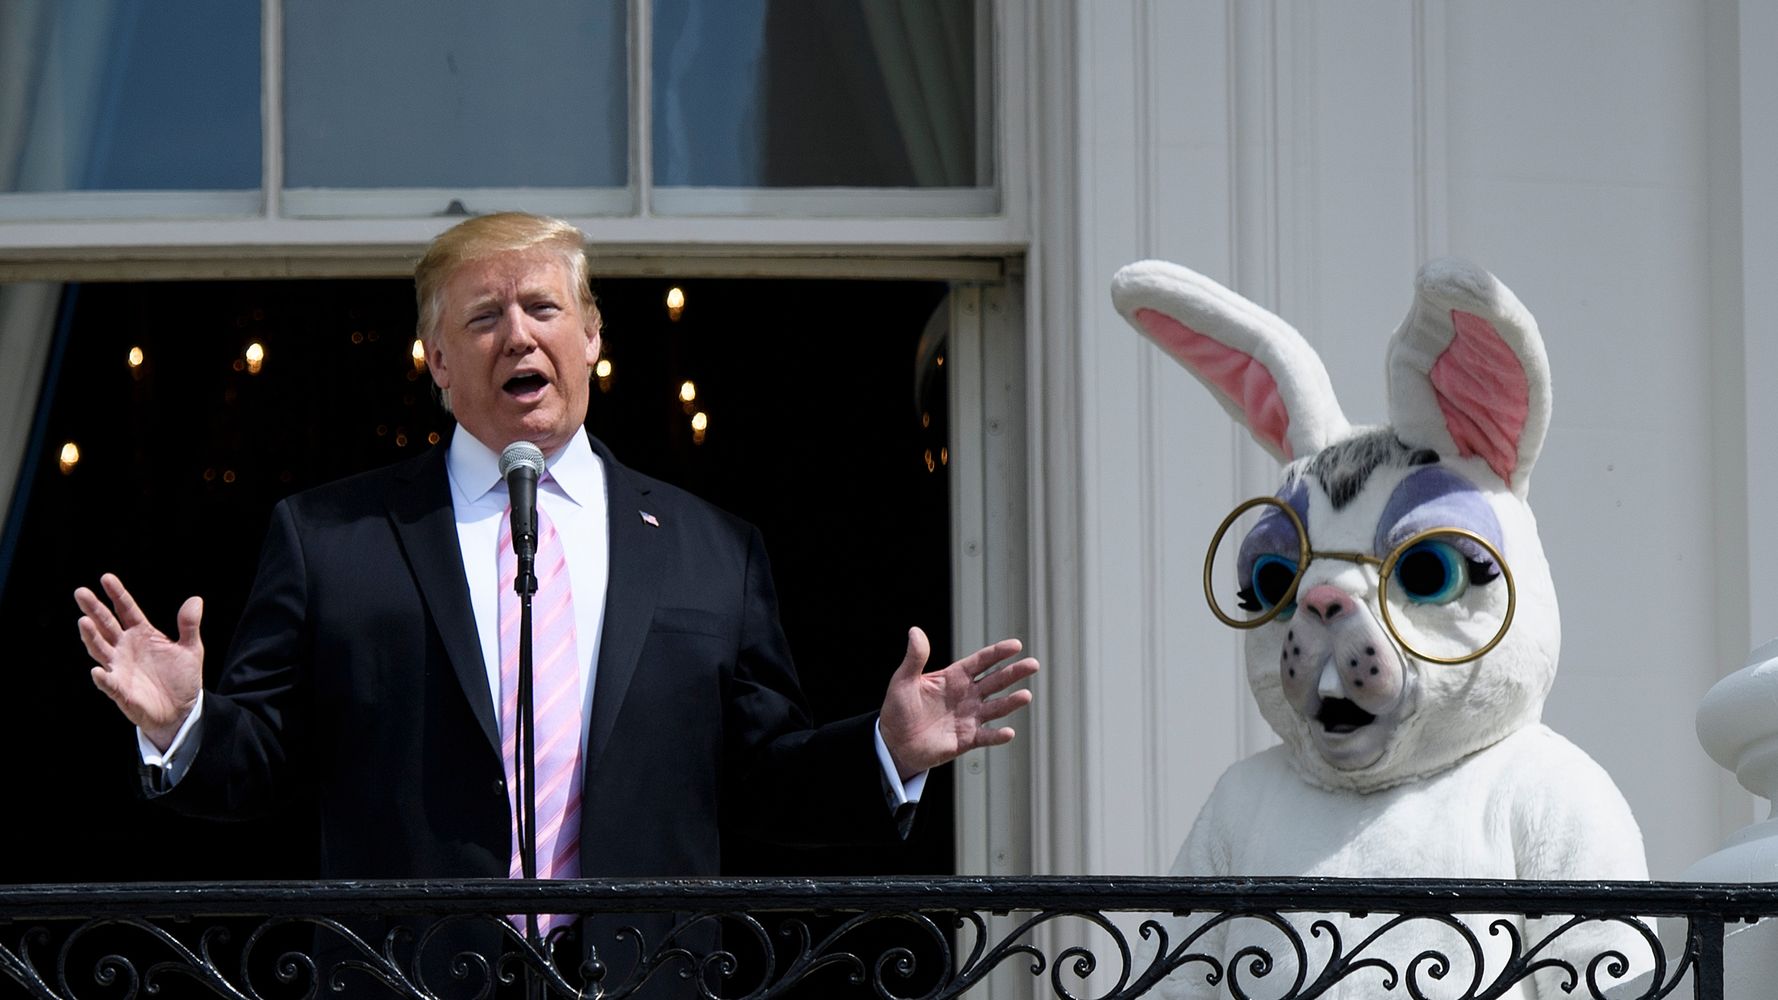 Donald Trump’s most recent election speech ends with “Plus Happy Easter”